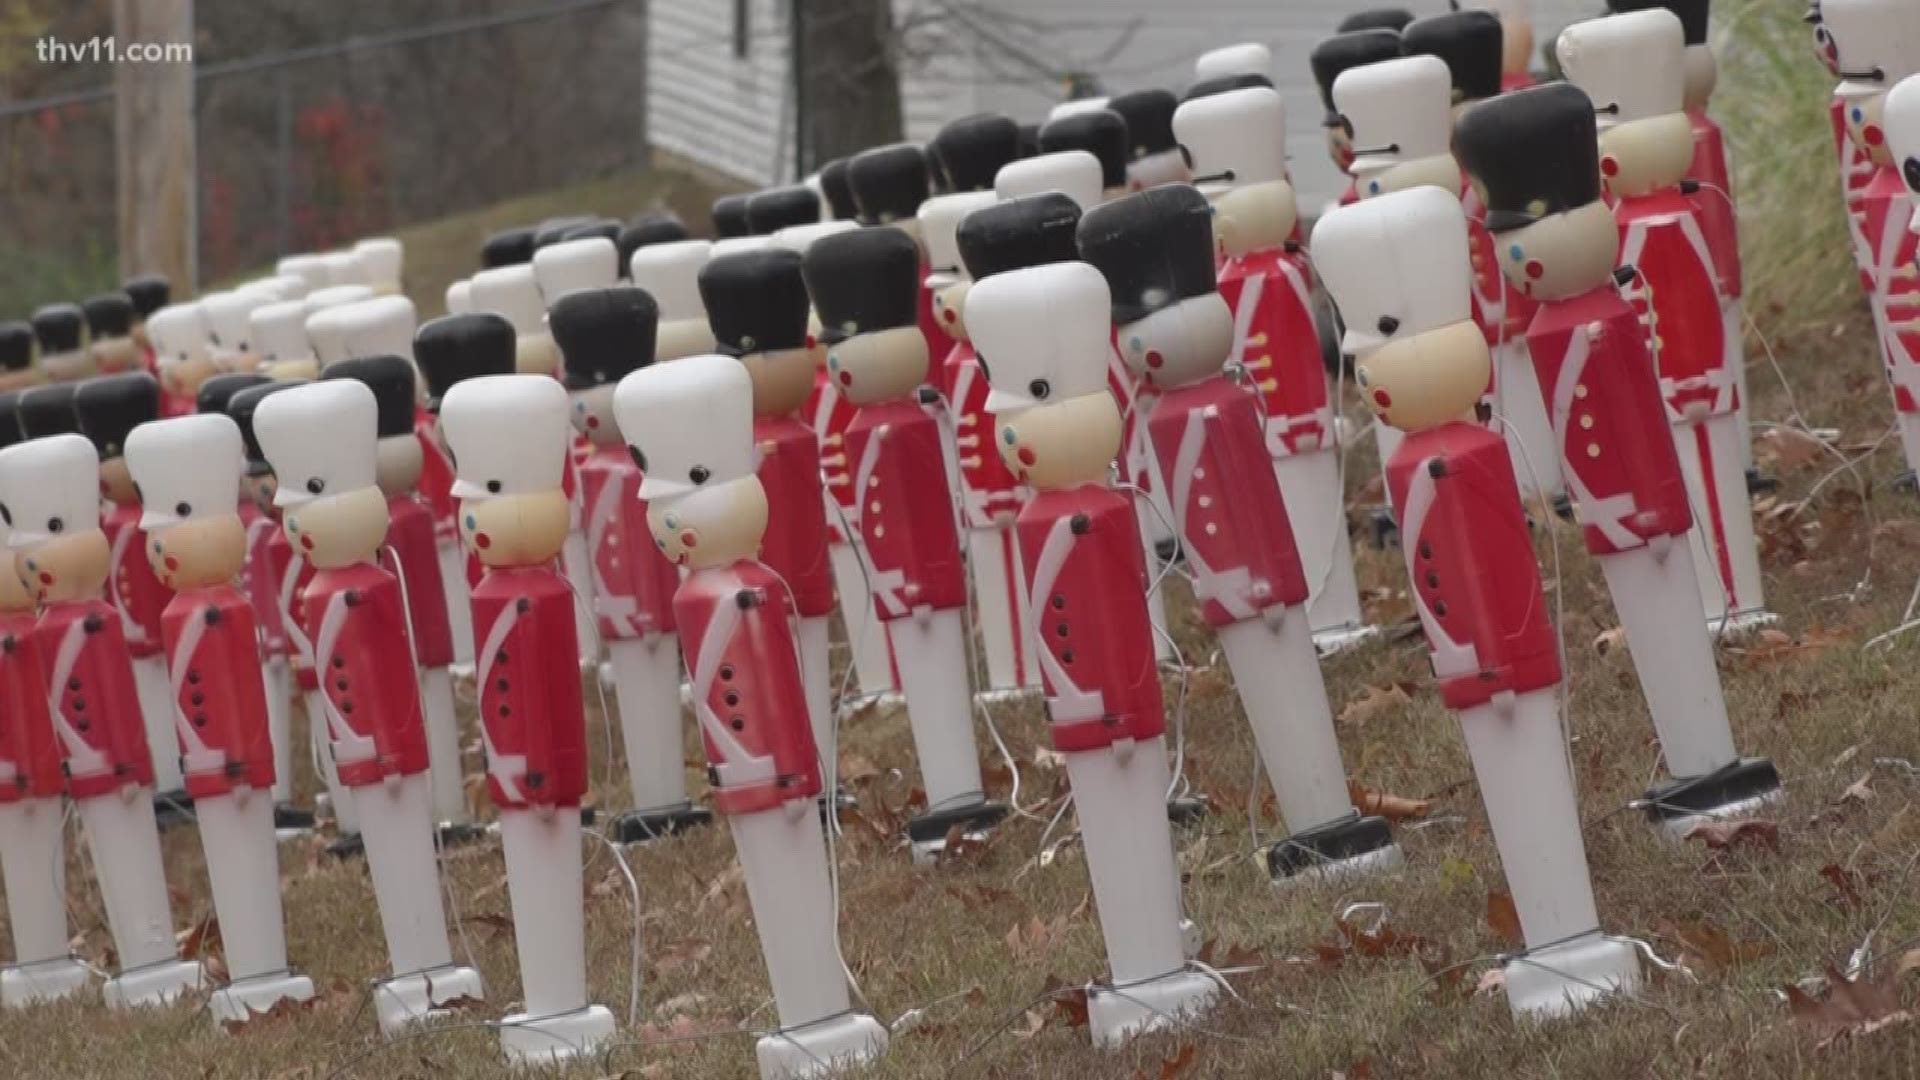 Toy soldiers invade Benton yard each year